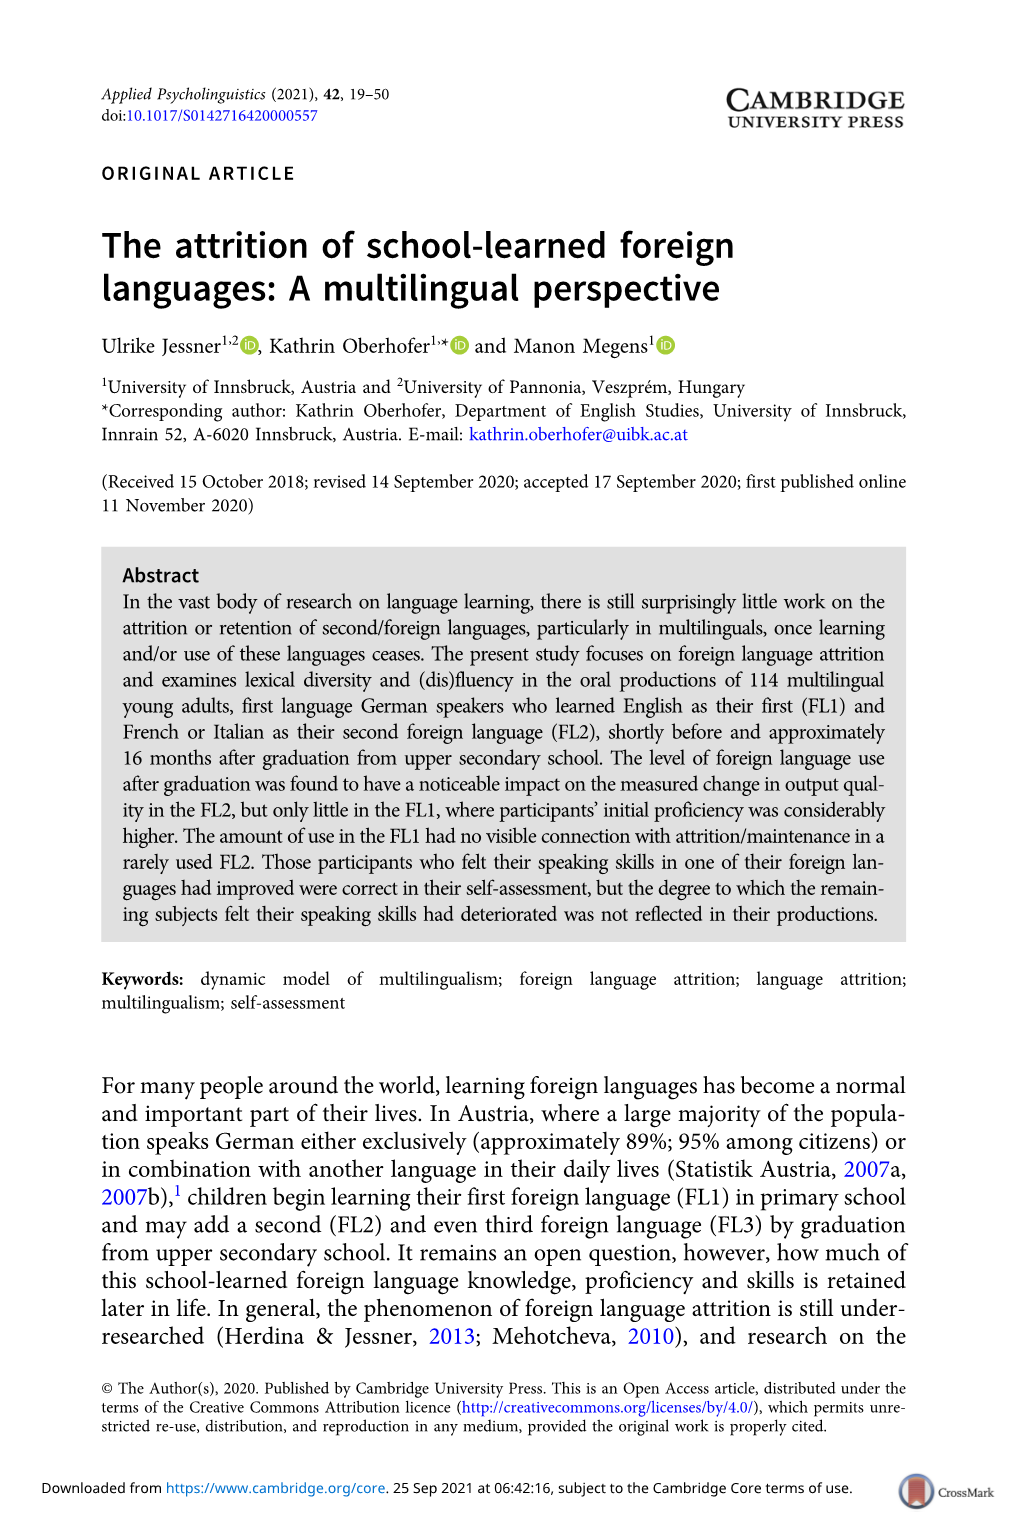 The Attrition of School-Learned Foreign Languages: a Multilingual Perspective